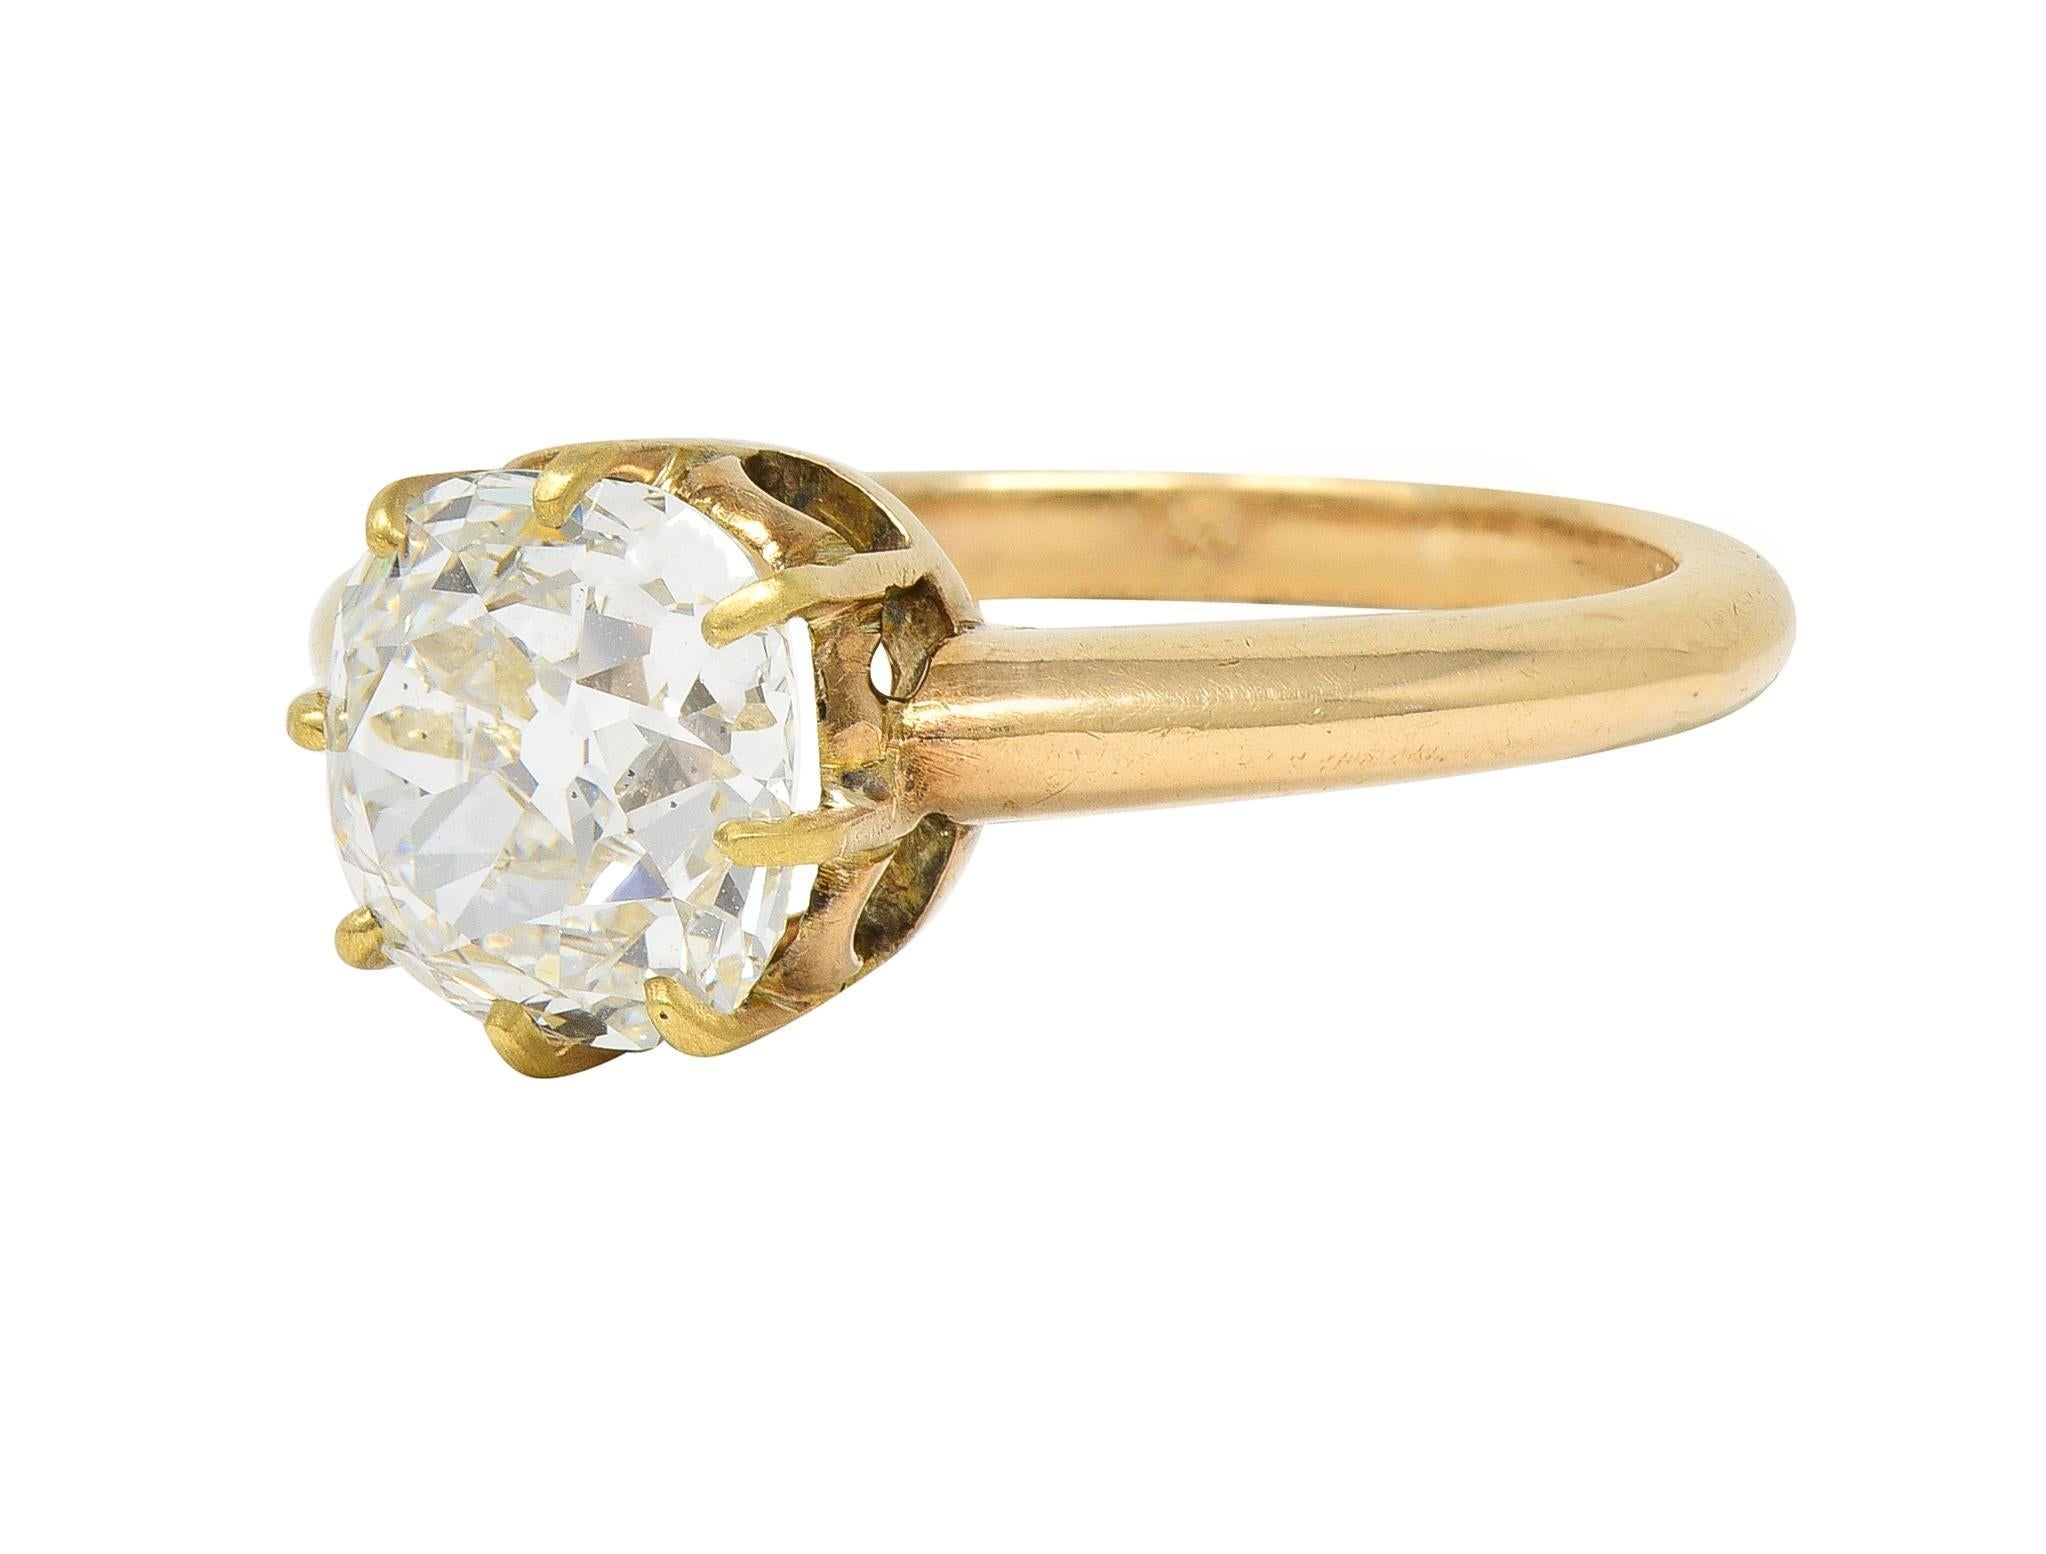 Victorian 2.11 CT Old Mine Cut Diamond 14 Karat Gold Antique Engagement Ring GIA For Sale 2